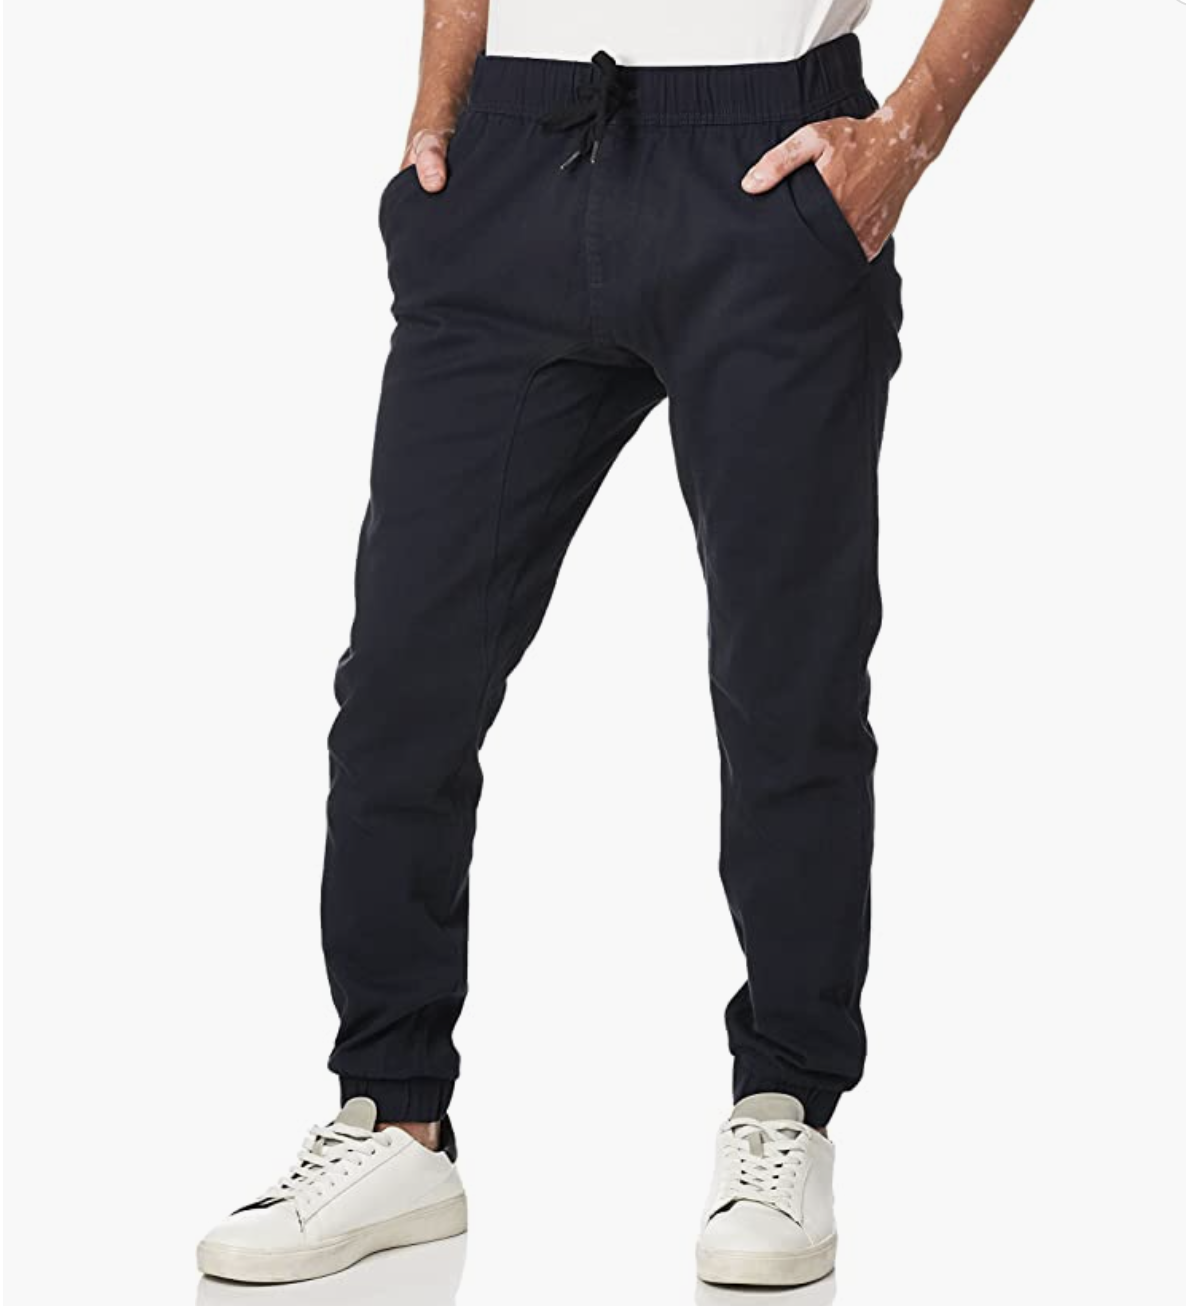 gifts-for-brother-in-law-joggers